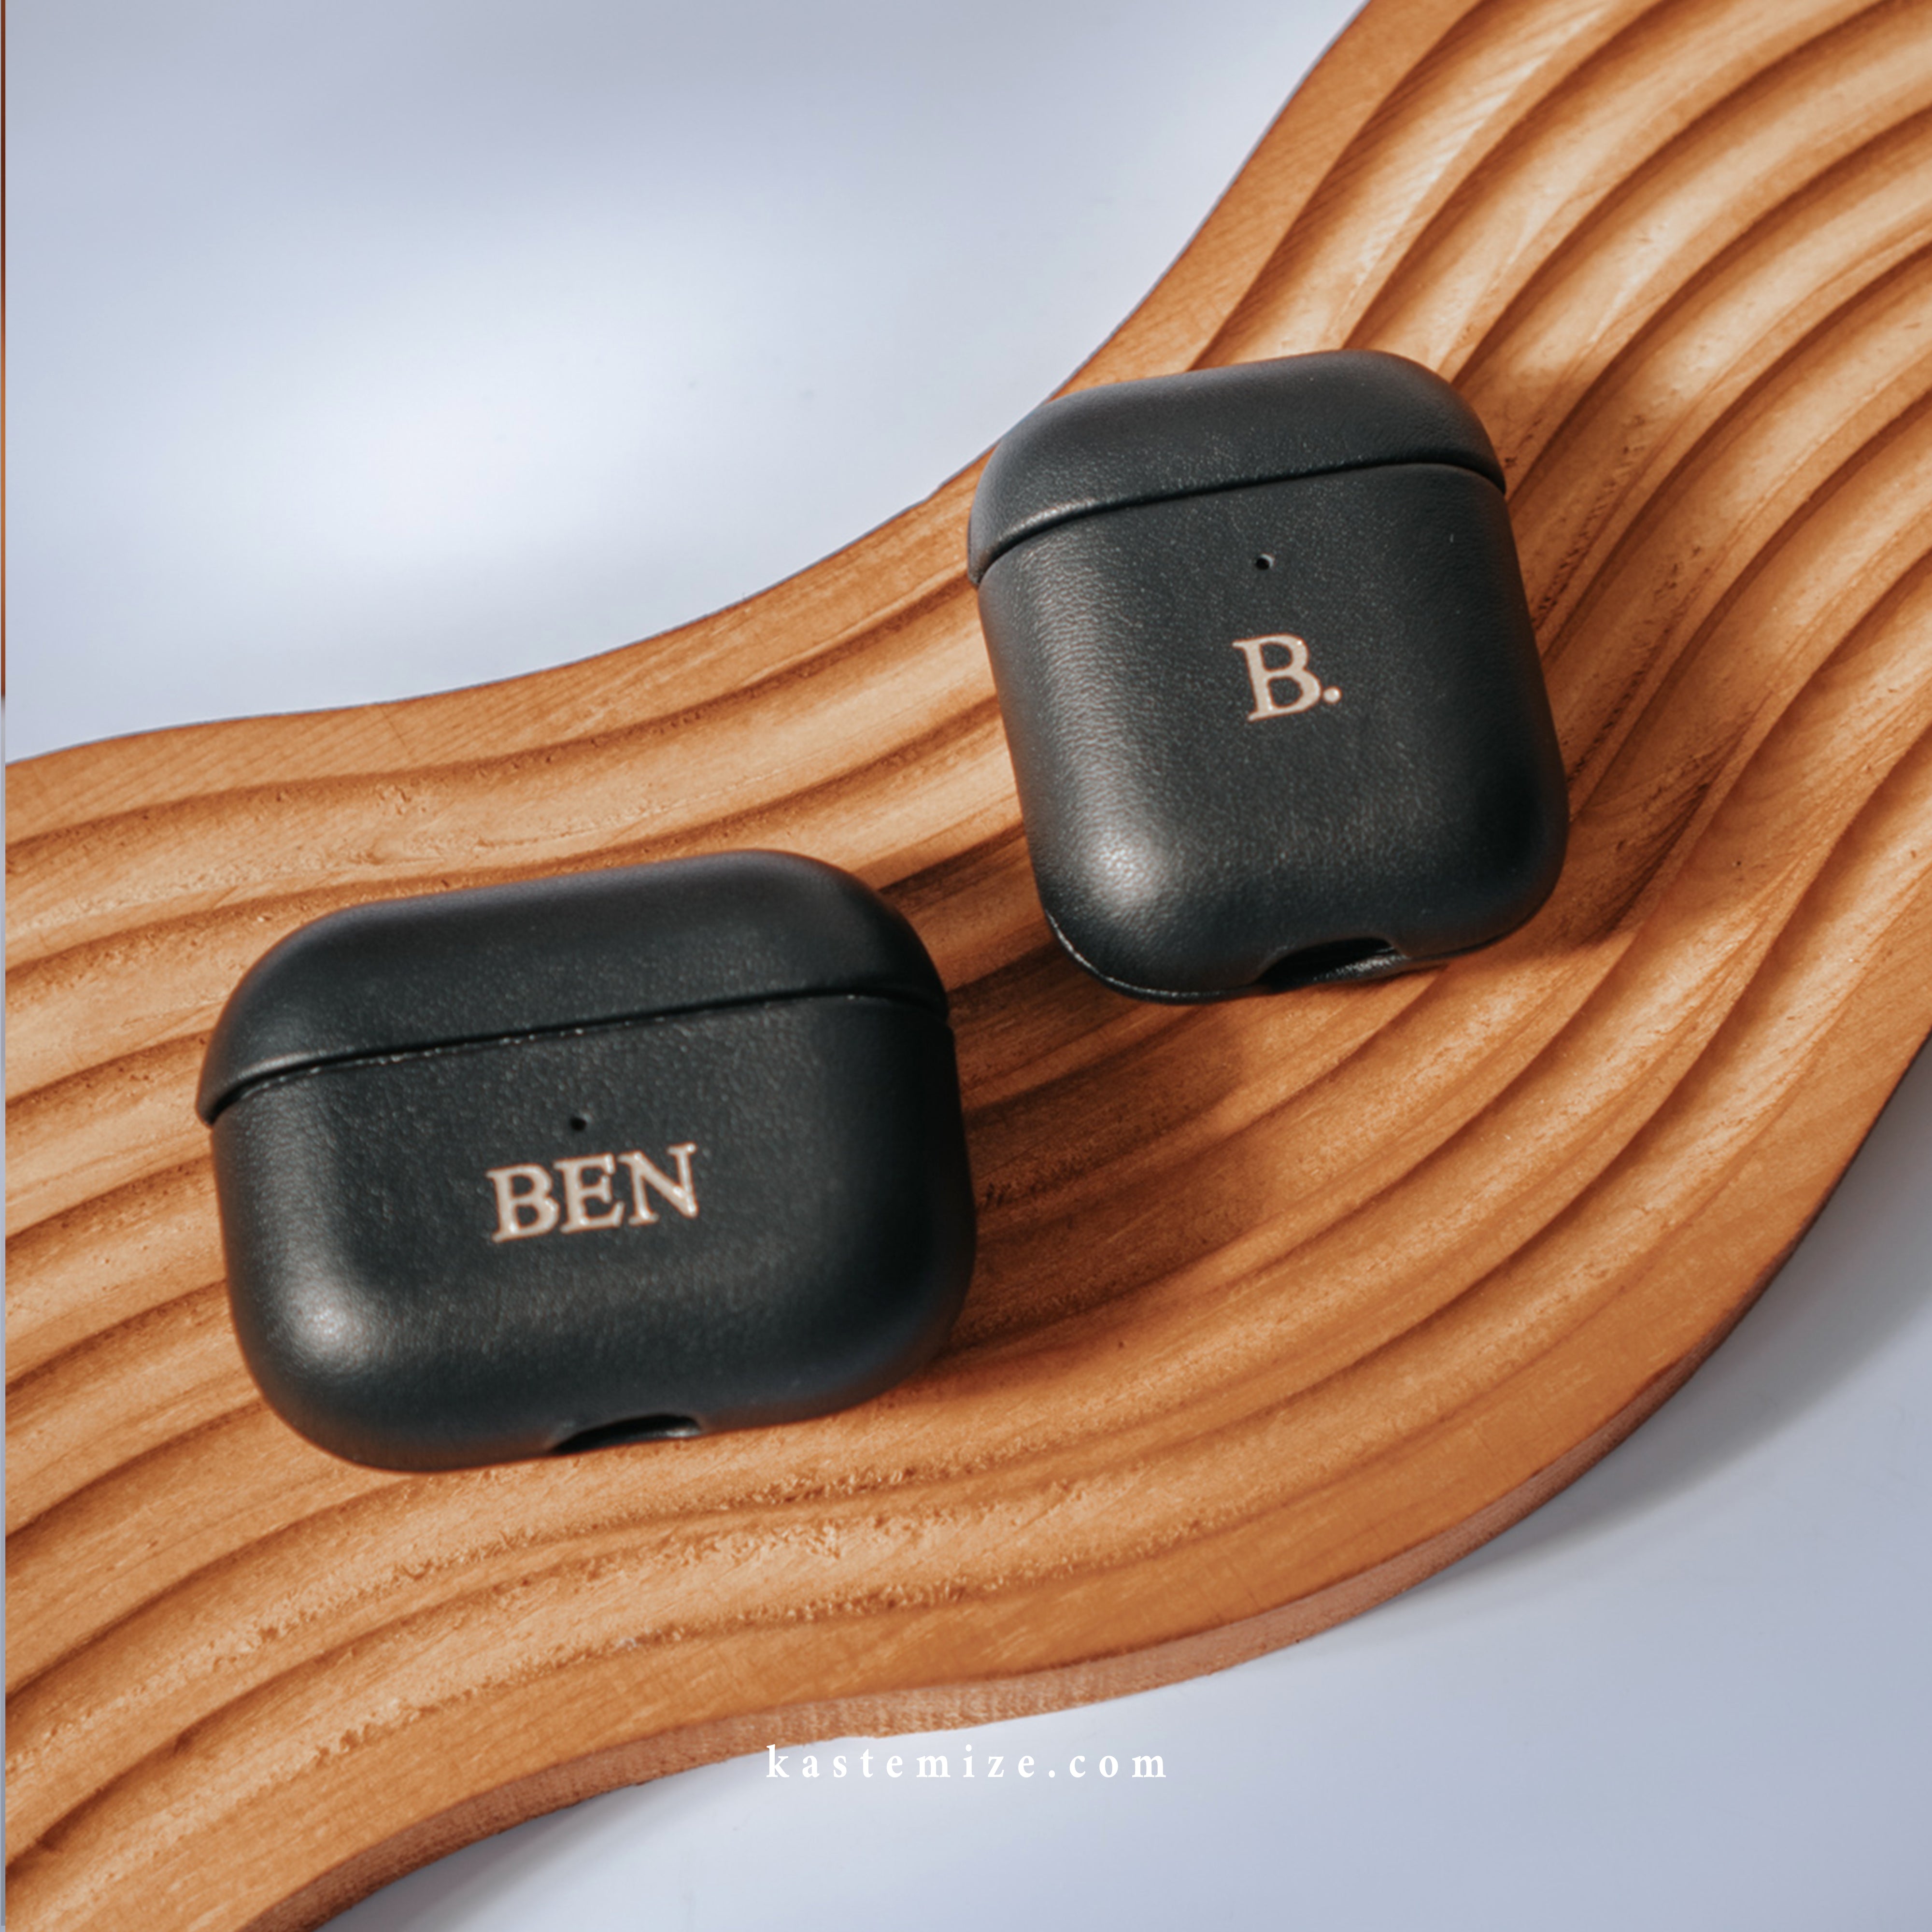 Personalised Black Airpods Pro Case in Singapore with name engraving and customisation